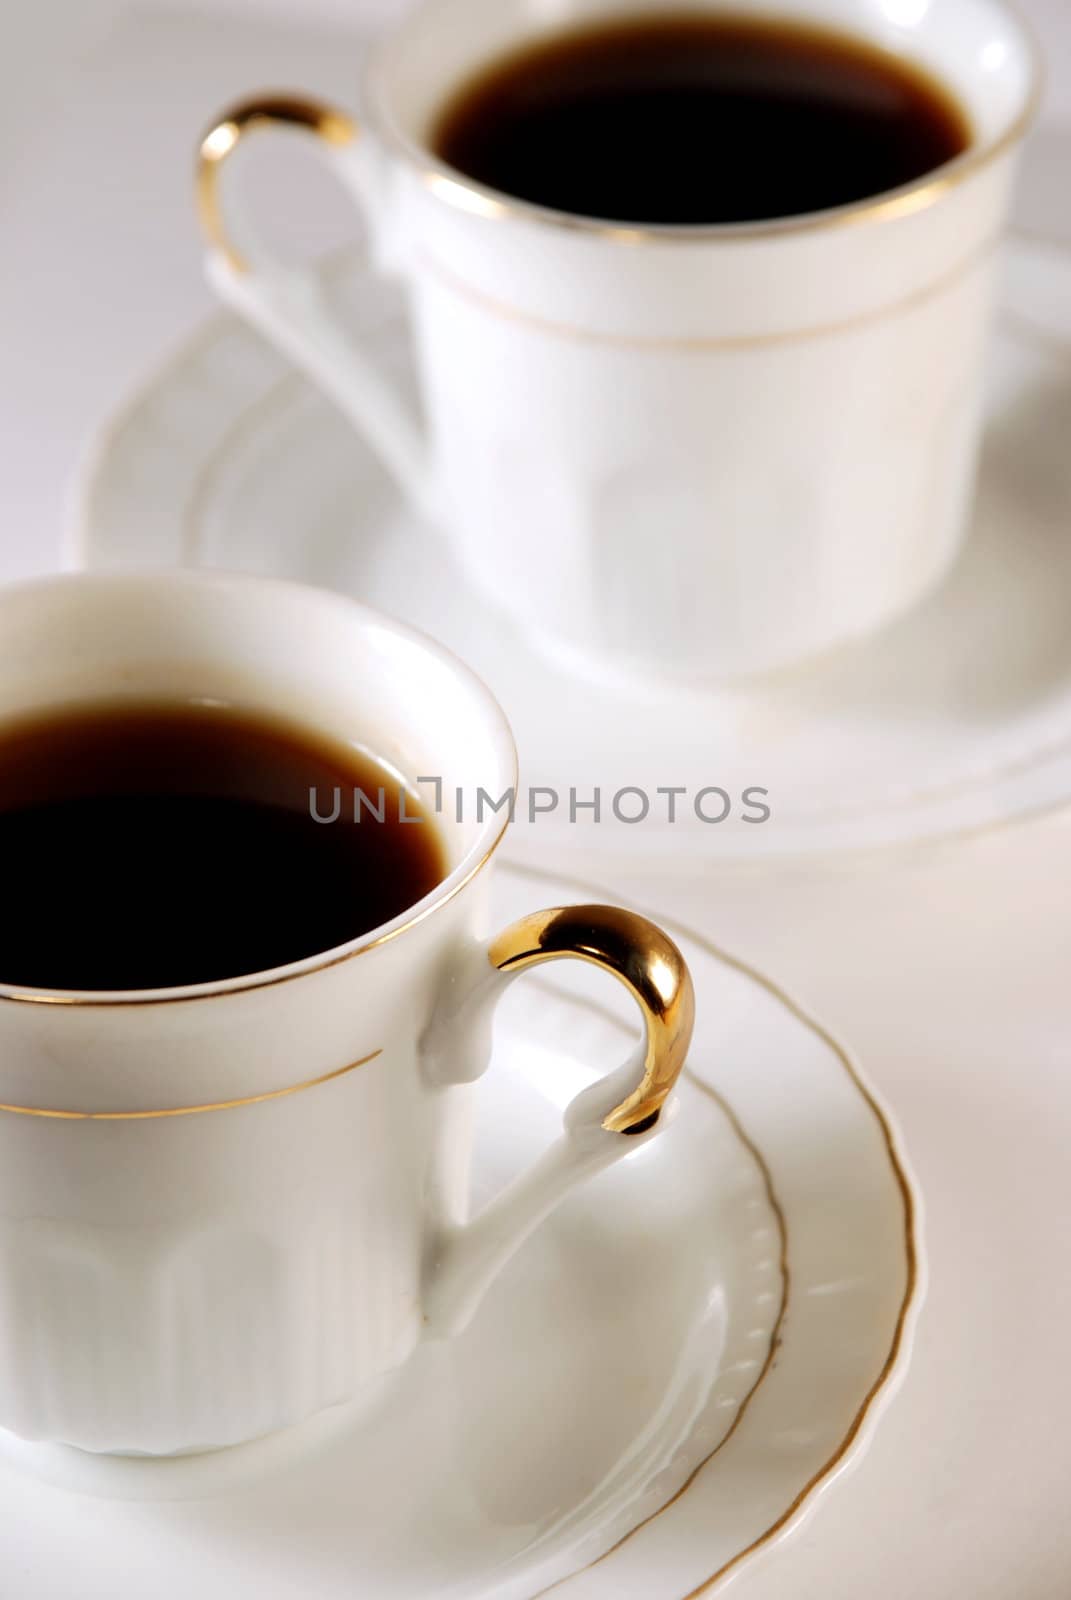 In the photo two white porcelain cups with coffee